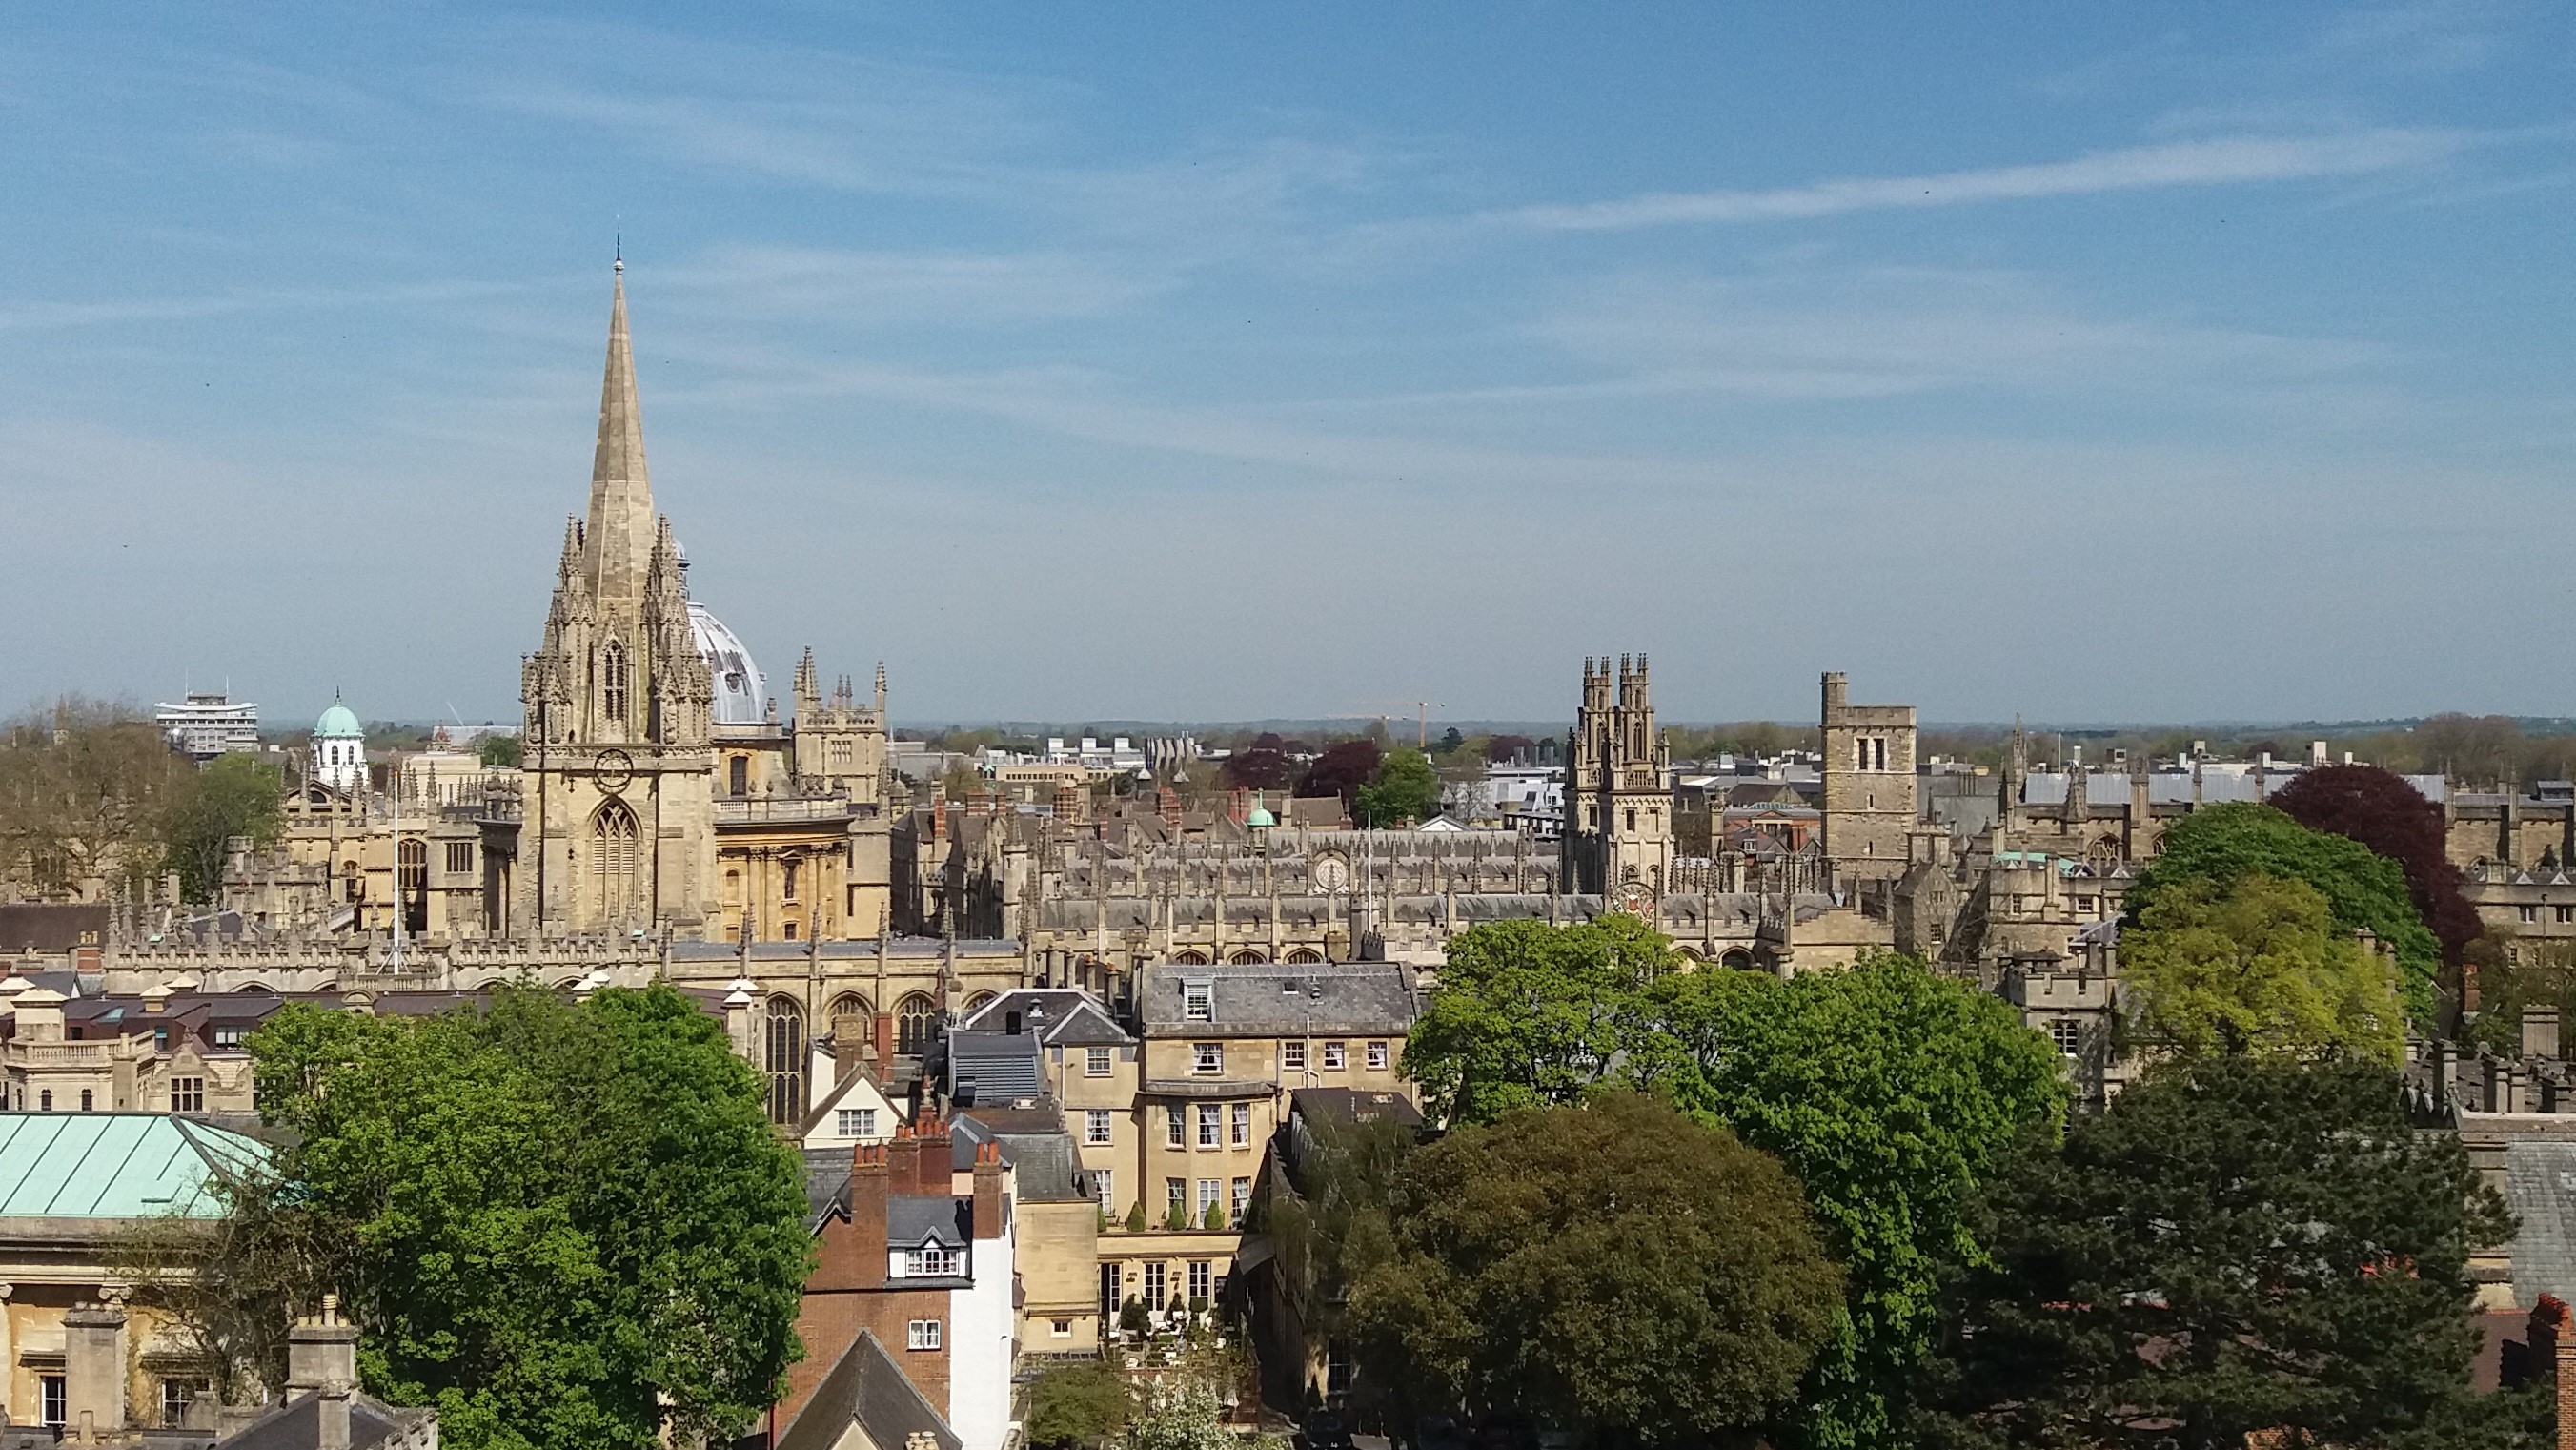 A view of the centre of Oxford taken from the tower of Merton College Chapel